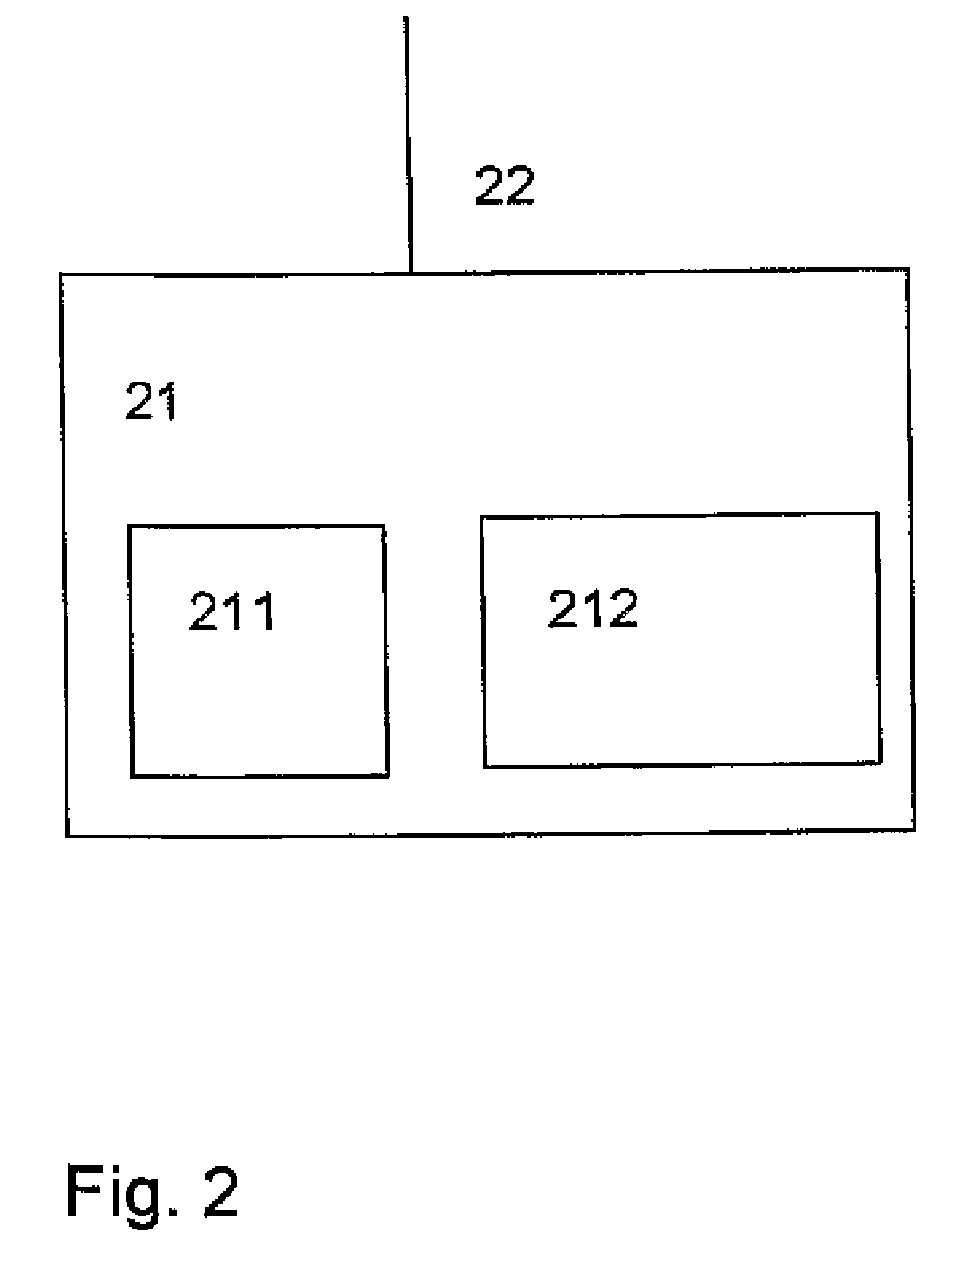 Method and System for Authorized Decryption of Encrypted Data